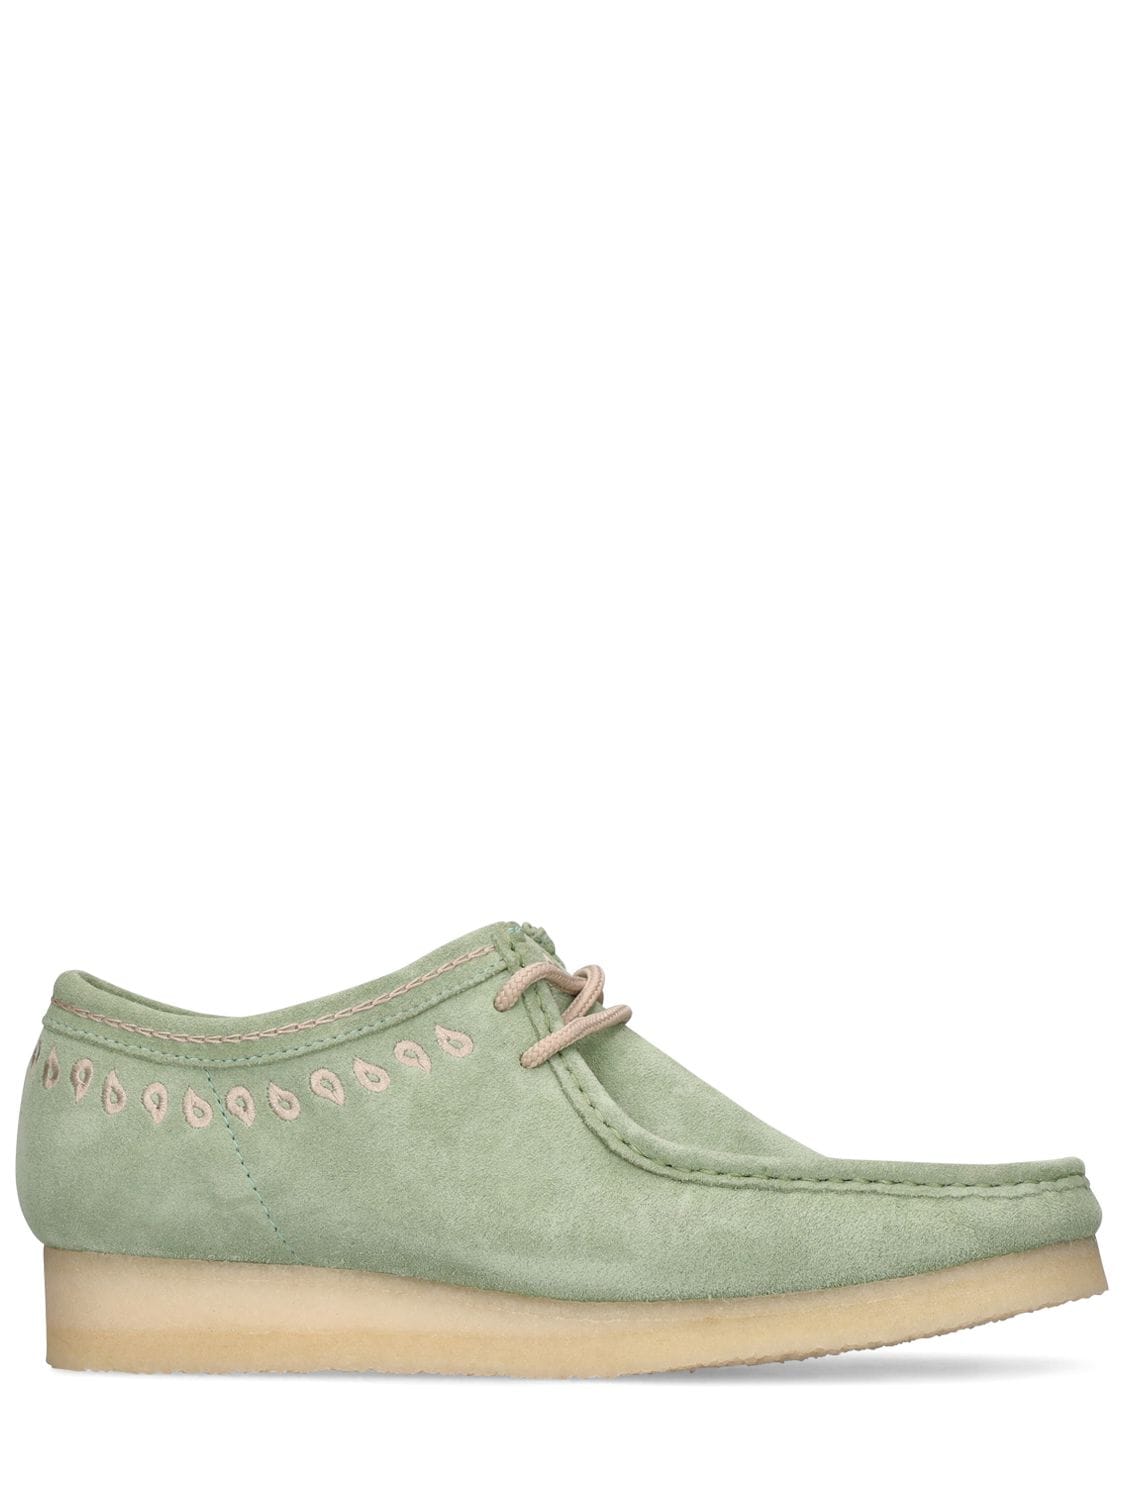 Mm Wallabee Leather Lace-up Shoes - CLARKS ORIGINALS - Modalova